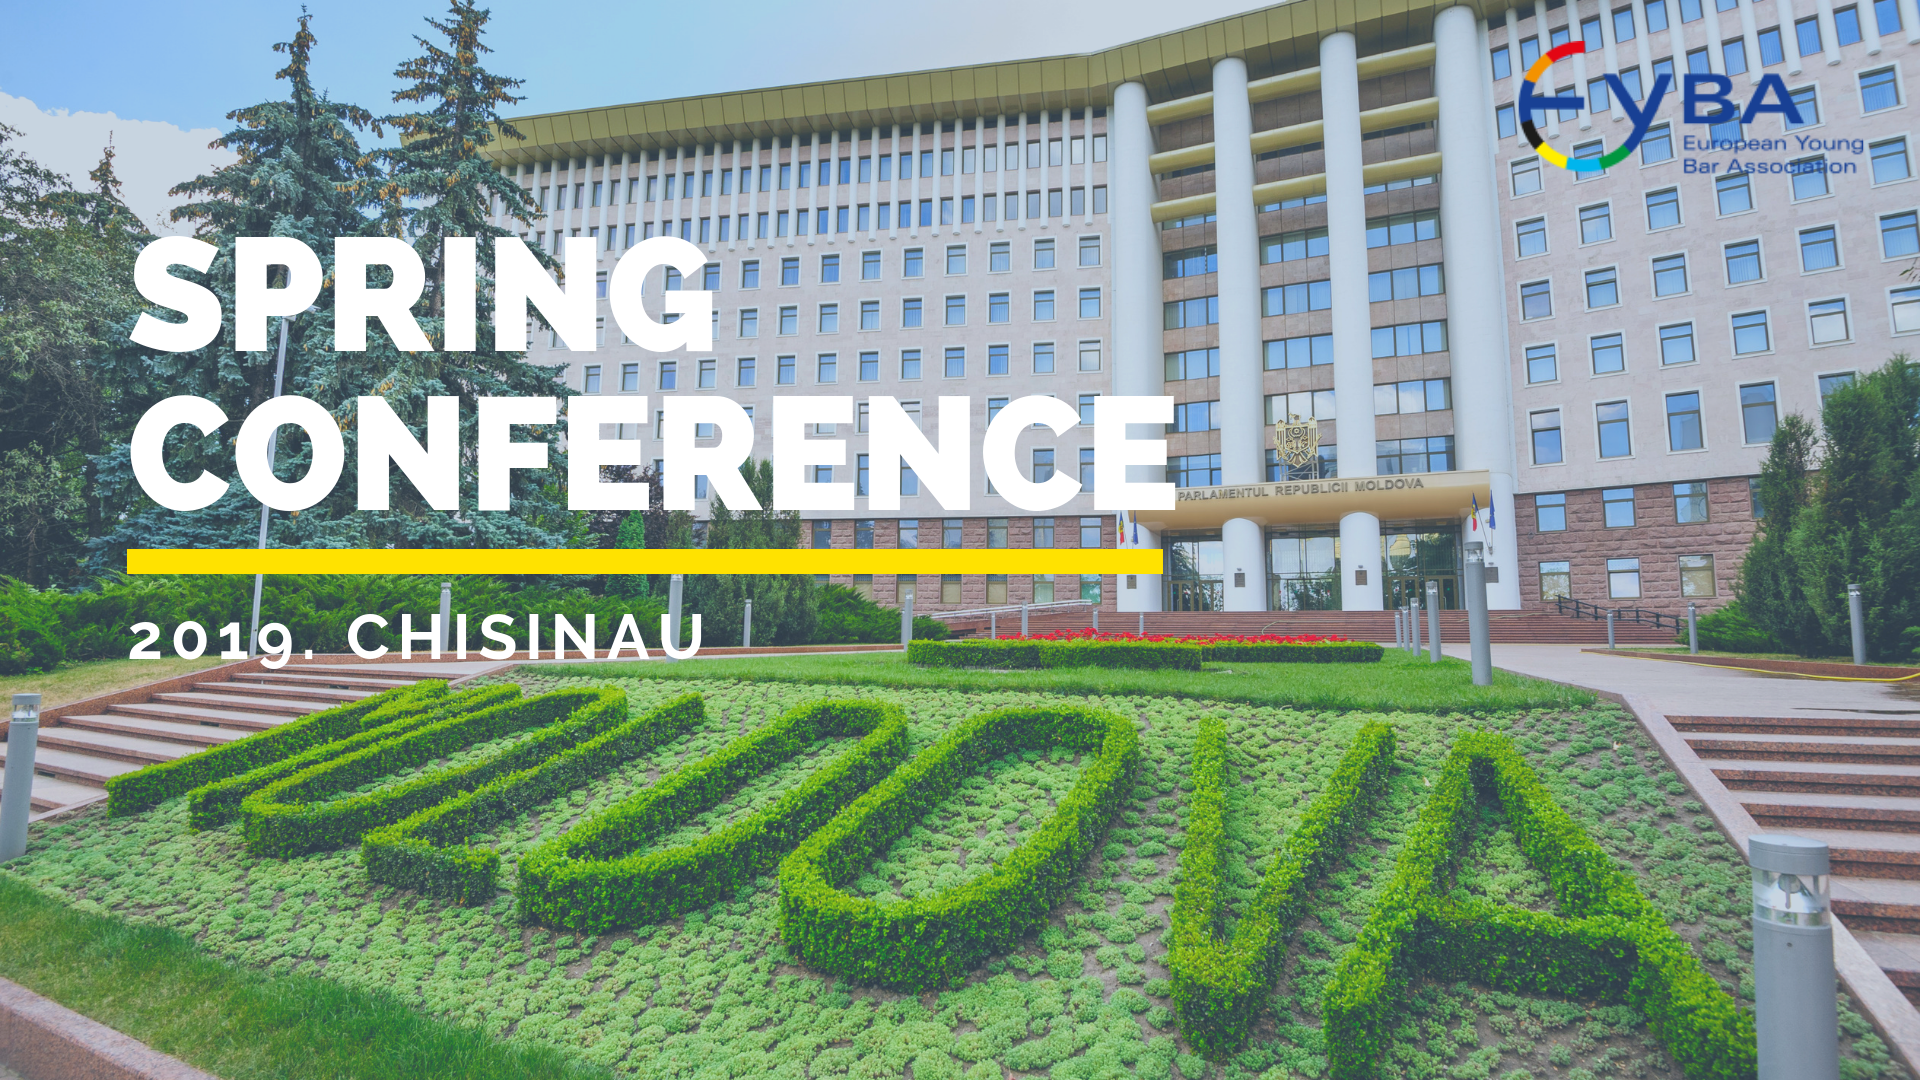 Spring Conference 2019 – Chisinau